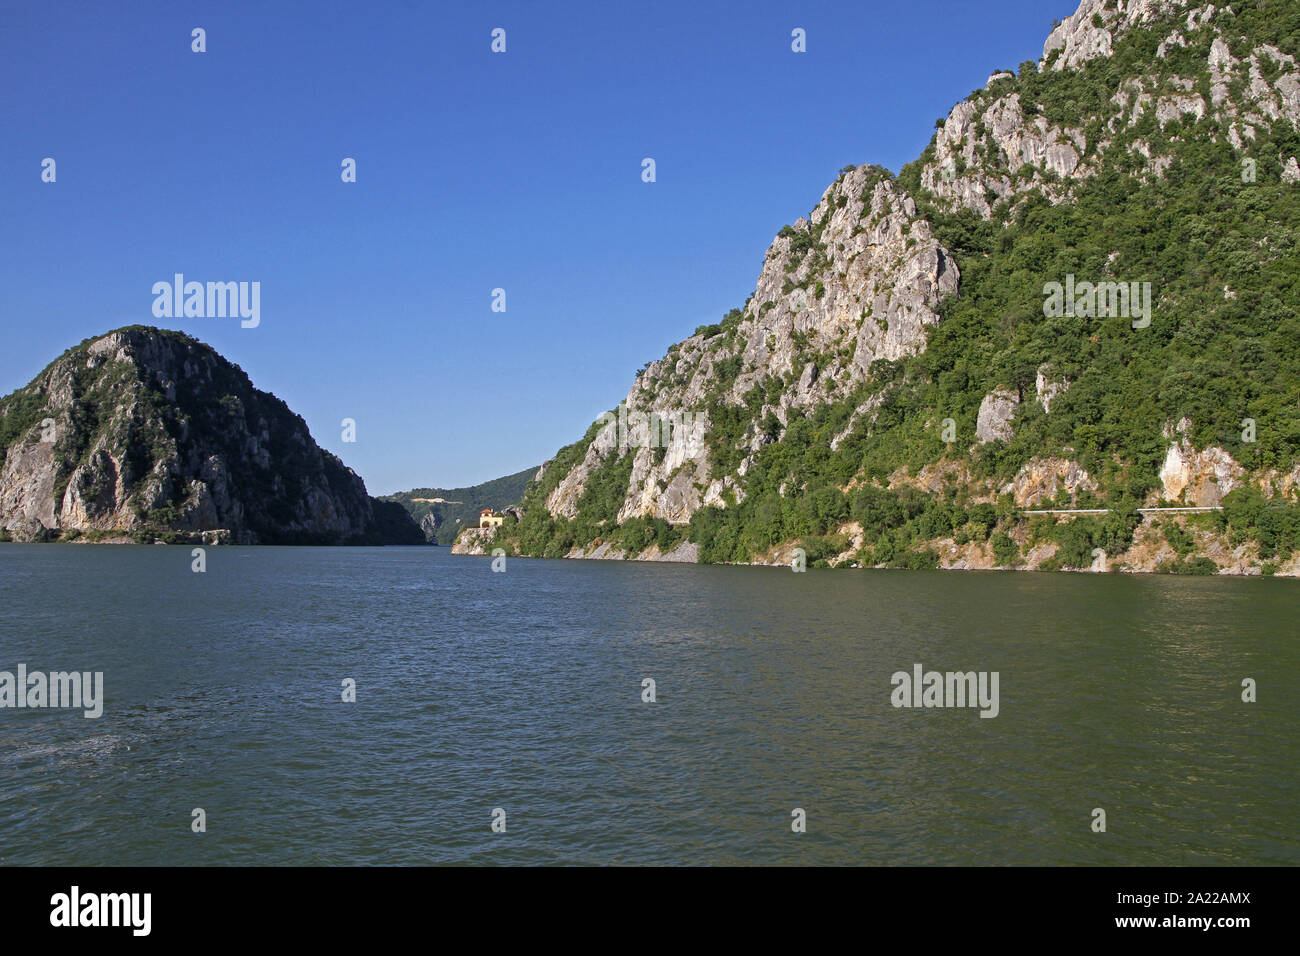 View of Djerdap Gorge and entrance to The Iron Gate and The Great Cauldron on the Danube River, border between Romania and Serbia. Stock Photo